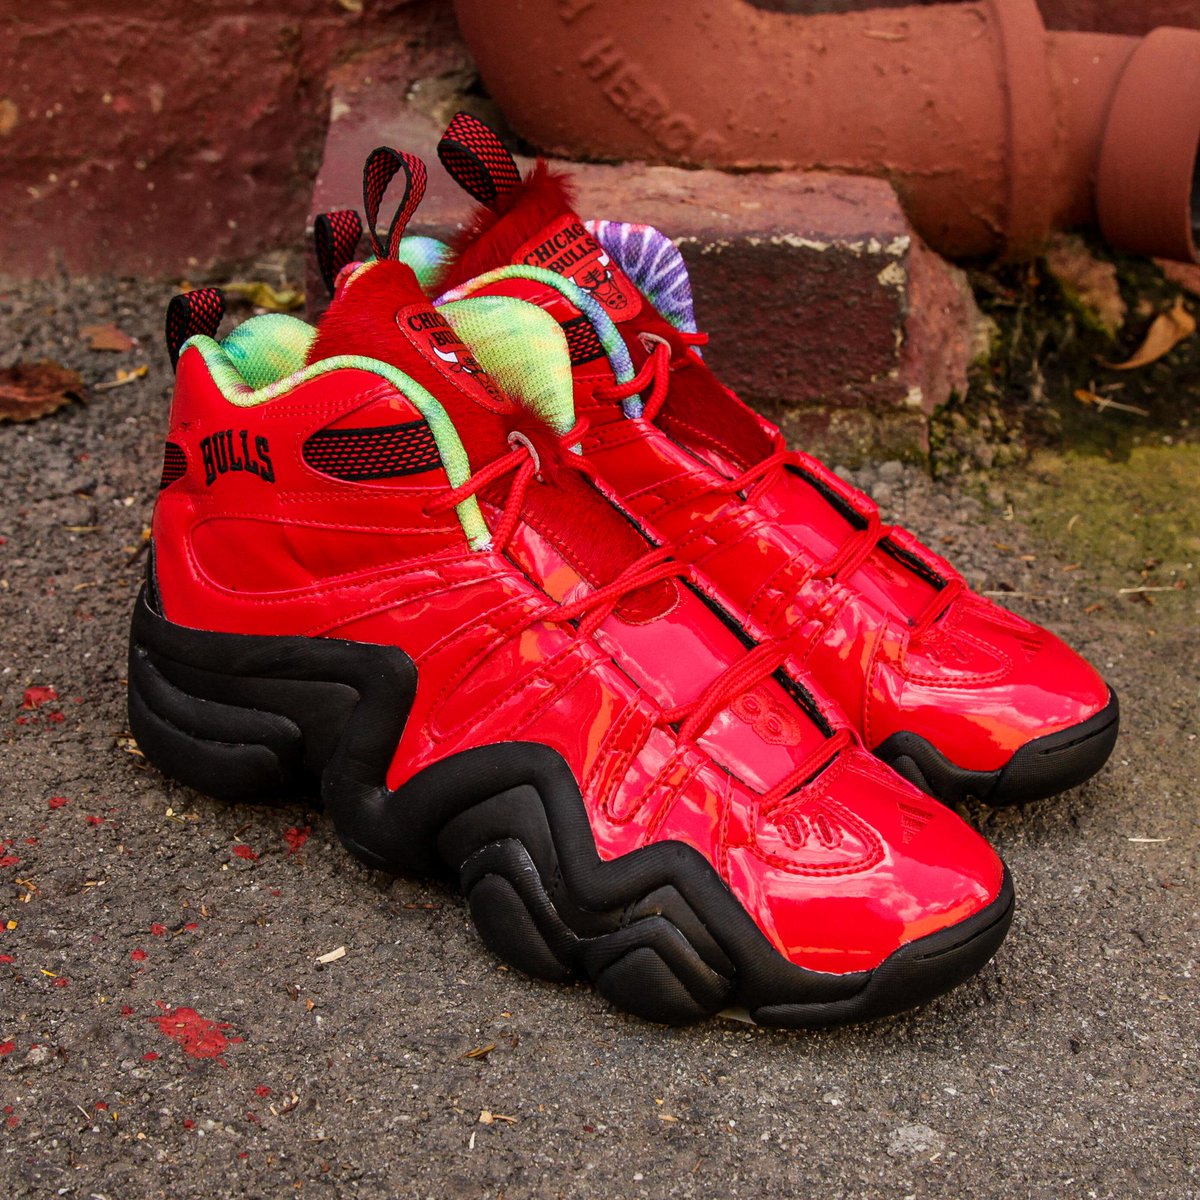 via abortion window PYS.com on Twitter: "The adidas Crazy 8 "Chicago Bulls 72-10" now available  at PYS. http://t.co/Qmj4hI5lh3 http://t.co/GAKFiZ4VuP" / Twitter